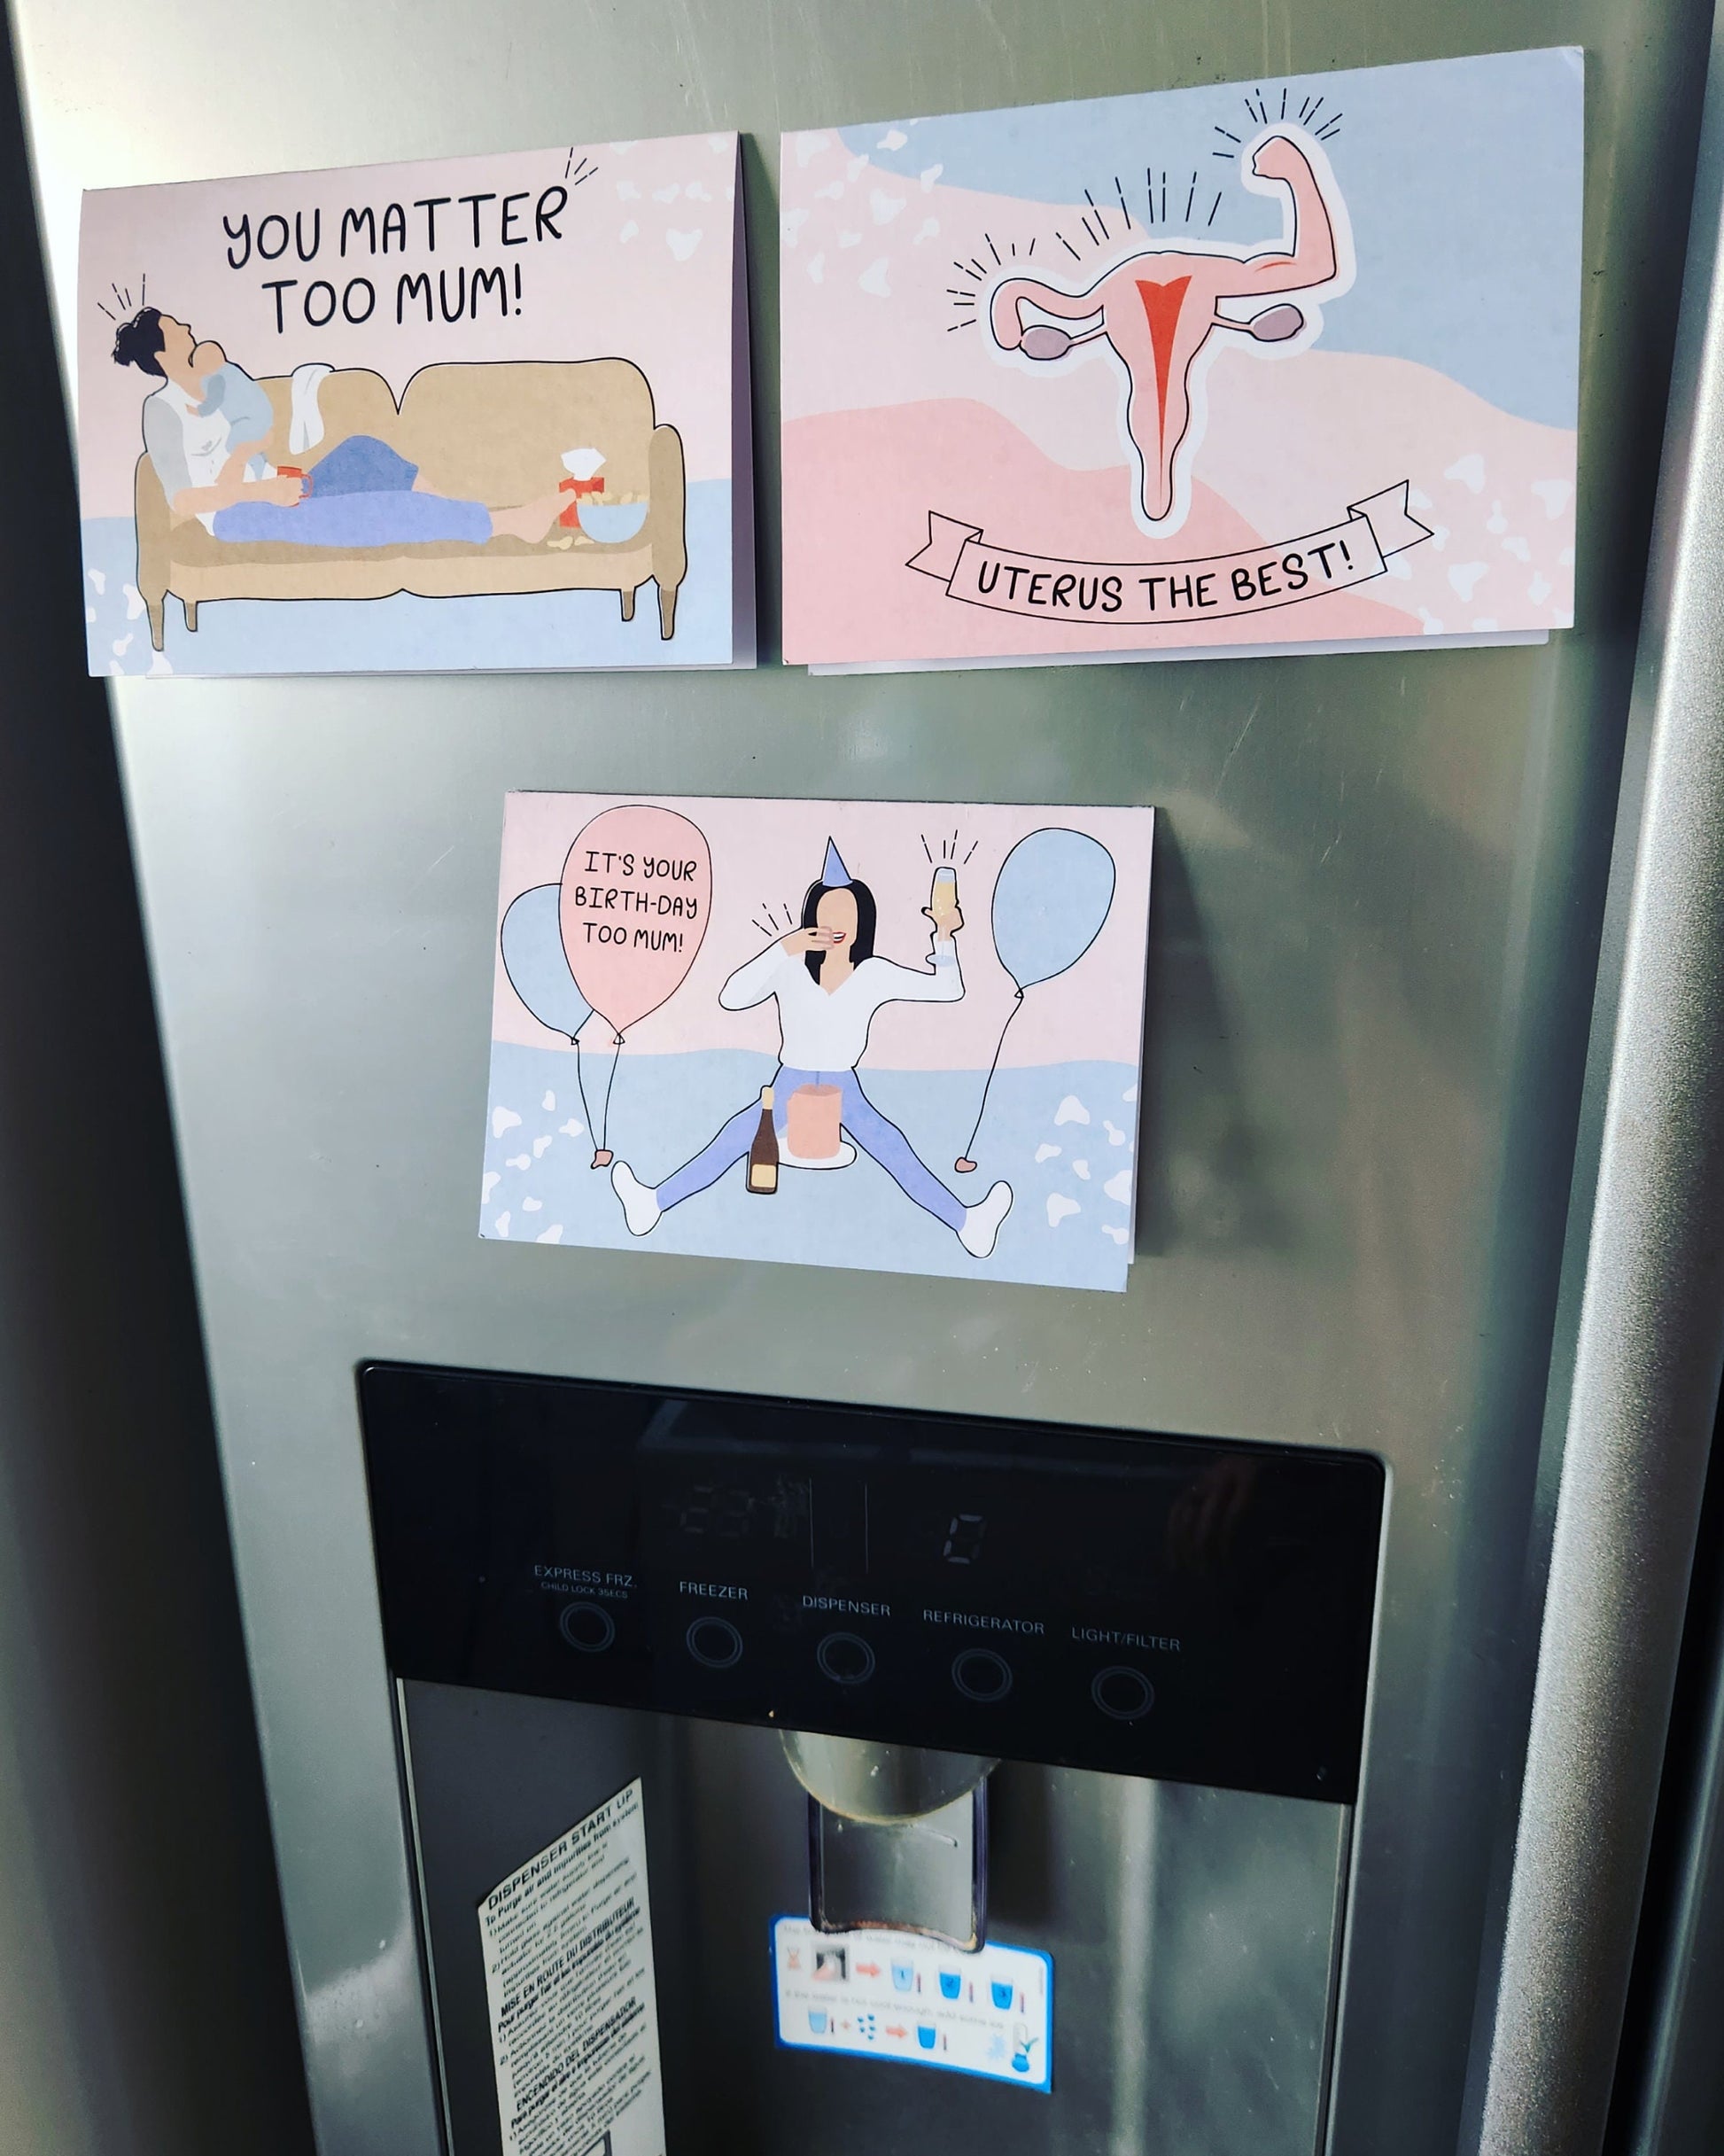 A picture of a fridge with three motherhood milestones cards sticking on it, it's your birthday too mum, uterus the best and you matter too mum.